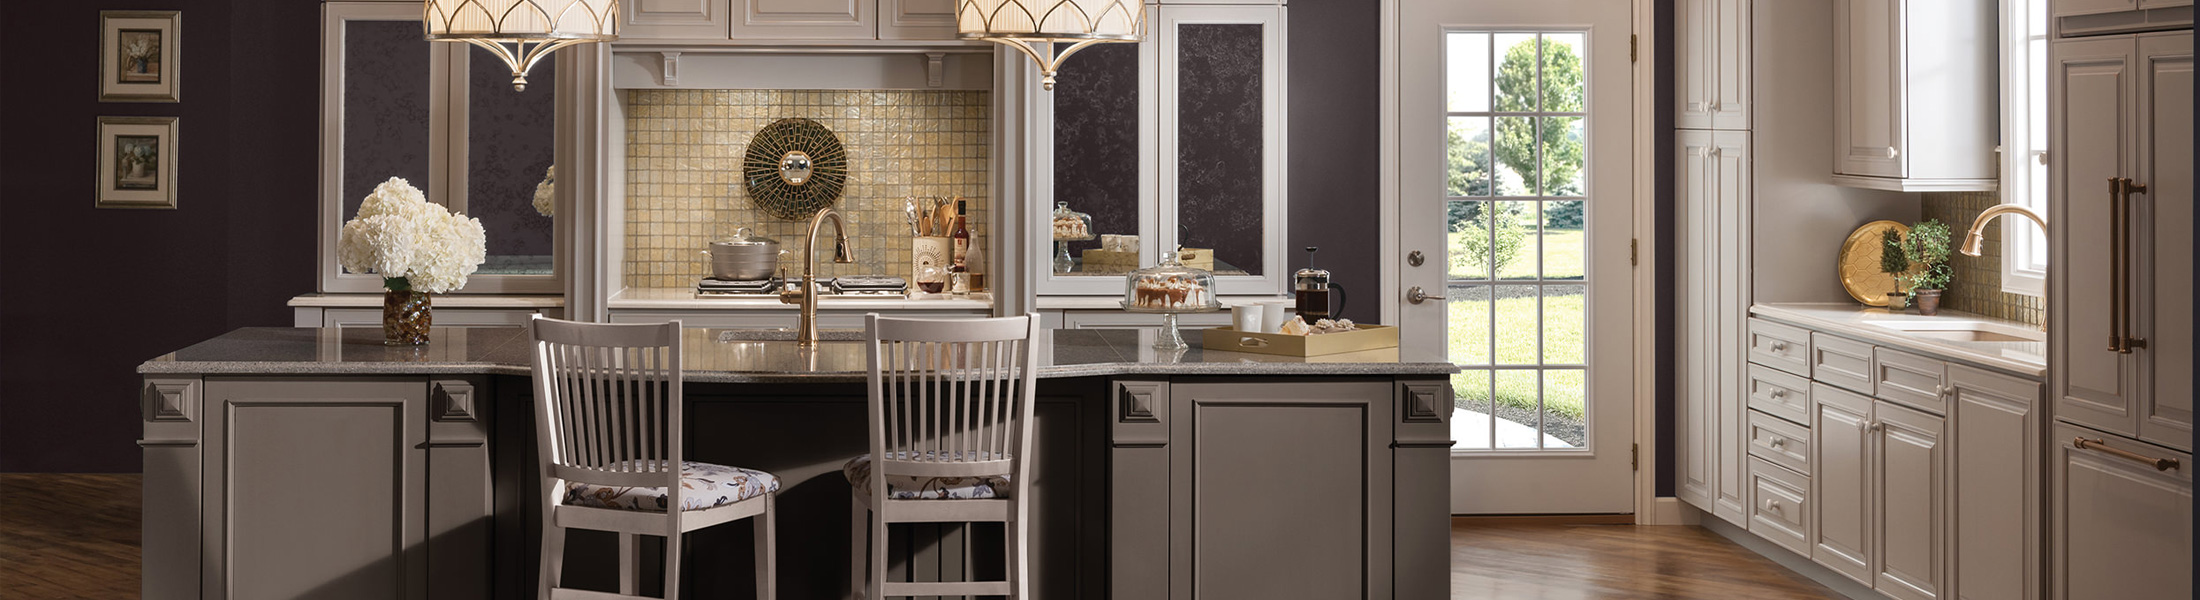 Kitchen and Bath Remodeling Products - Cabinetry, Countertops, Hardware and more